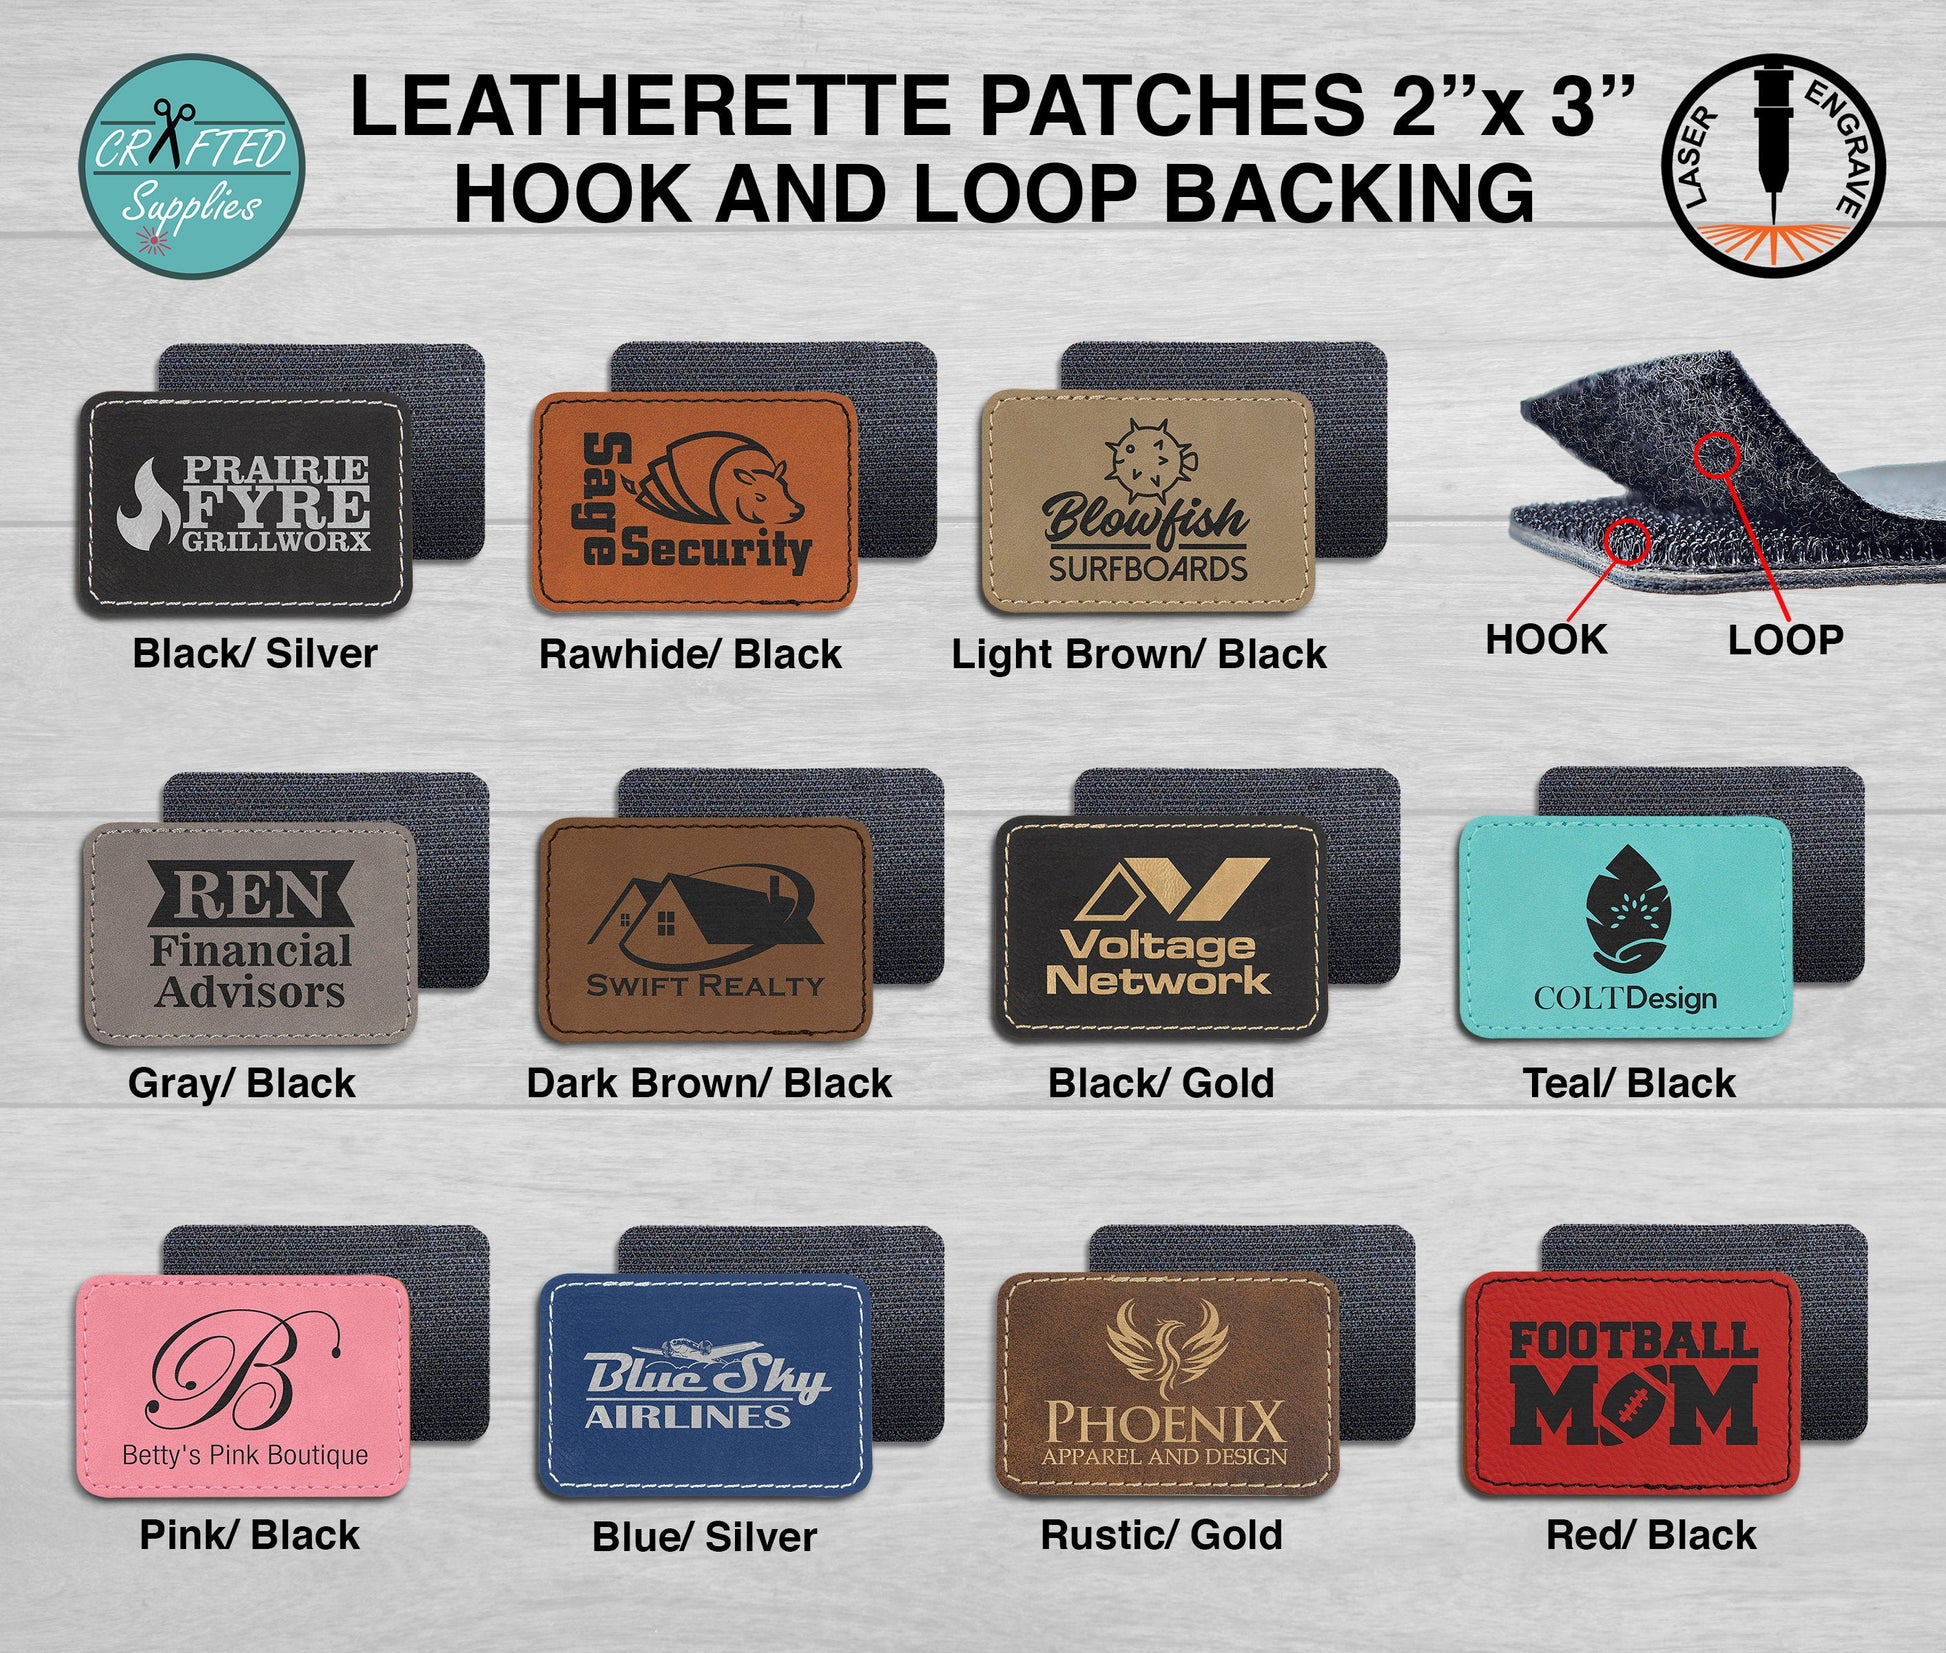 LASER LEATHERETTE SAMPLE PACK - BLANK PATCHES